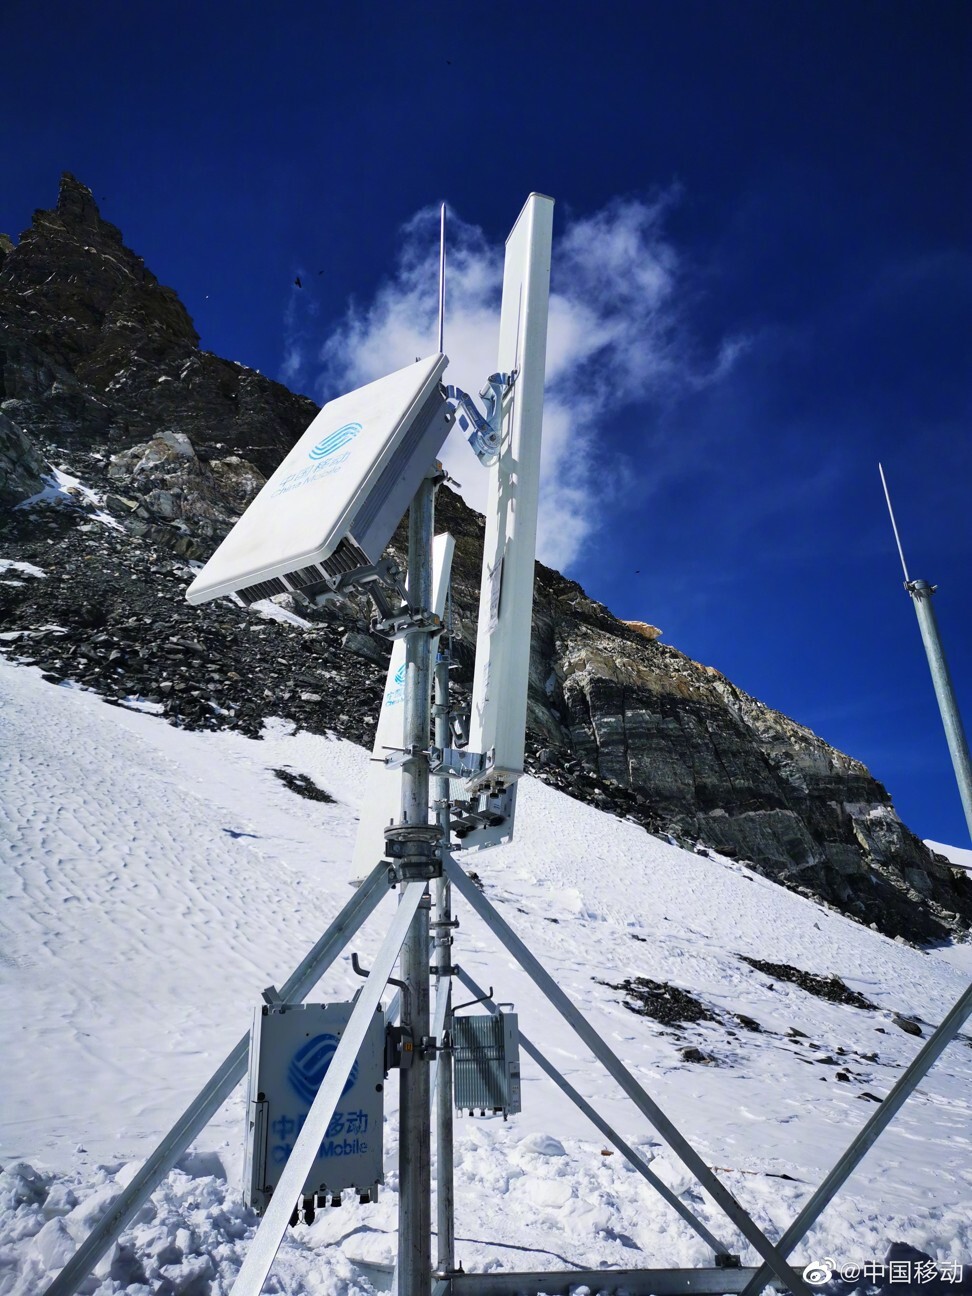 China Mobile plans to install two more 5G base stations, supplied by telecommunications gear maker Huawei Technologies, on Mount Everest before April 25. Photo: Weibo